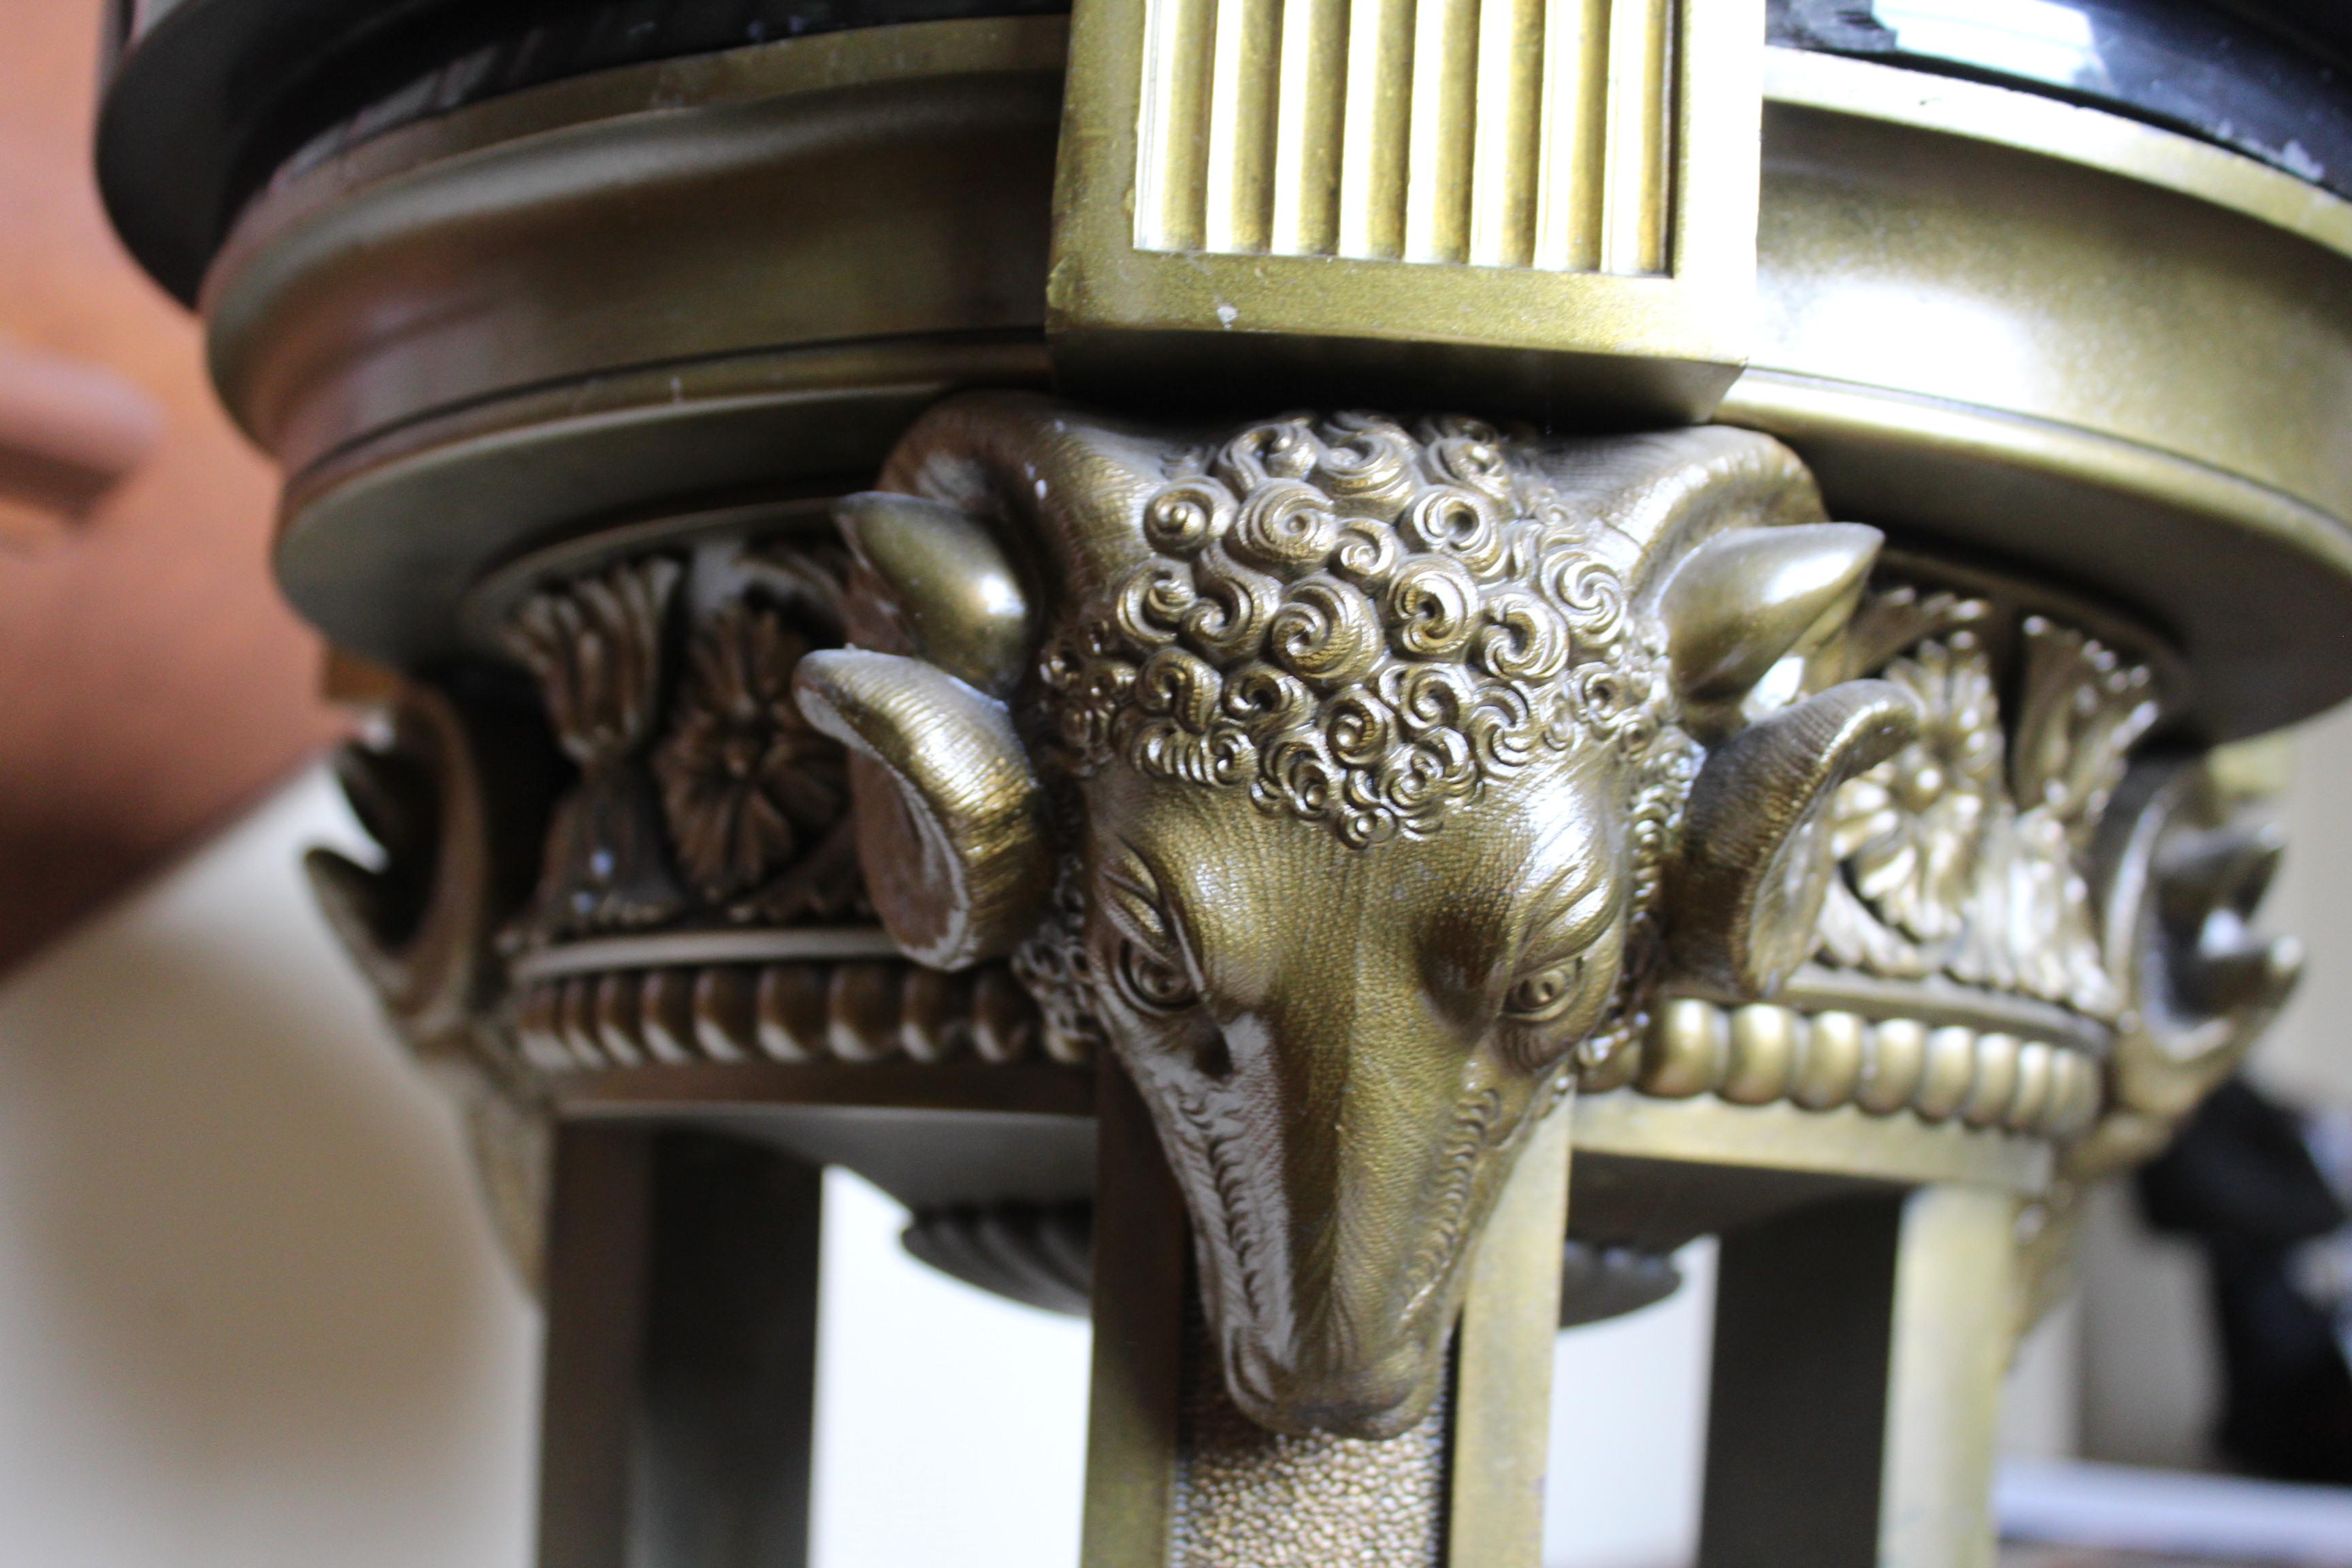 A very fine detailed Casting of Rams Heads and further details around the top part . All together on three Leg base with splayed feet .Has a nice golden patina finish . The marble top 16